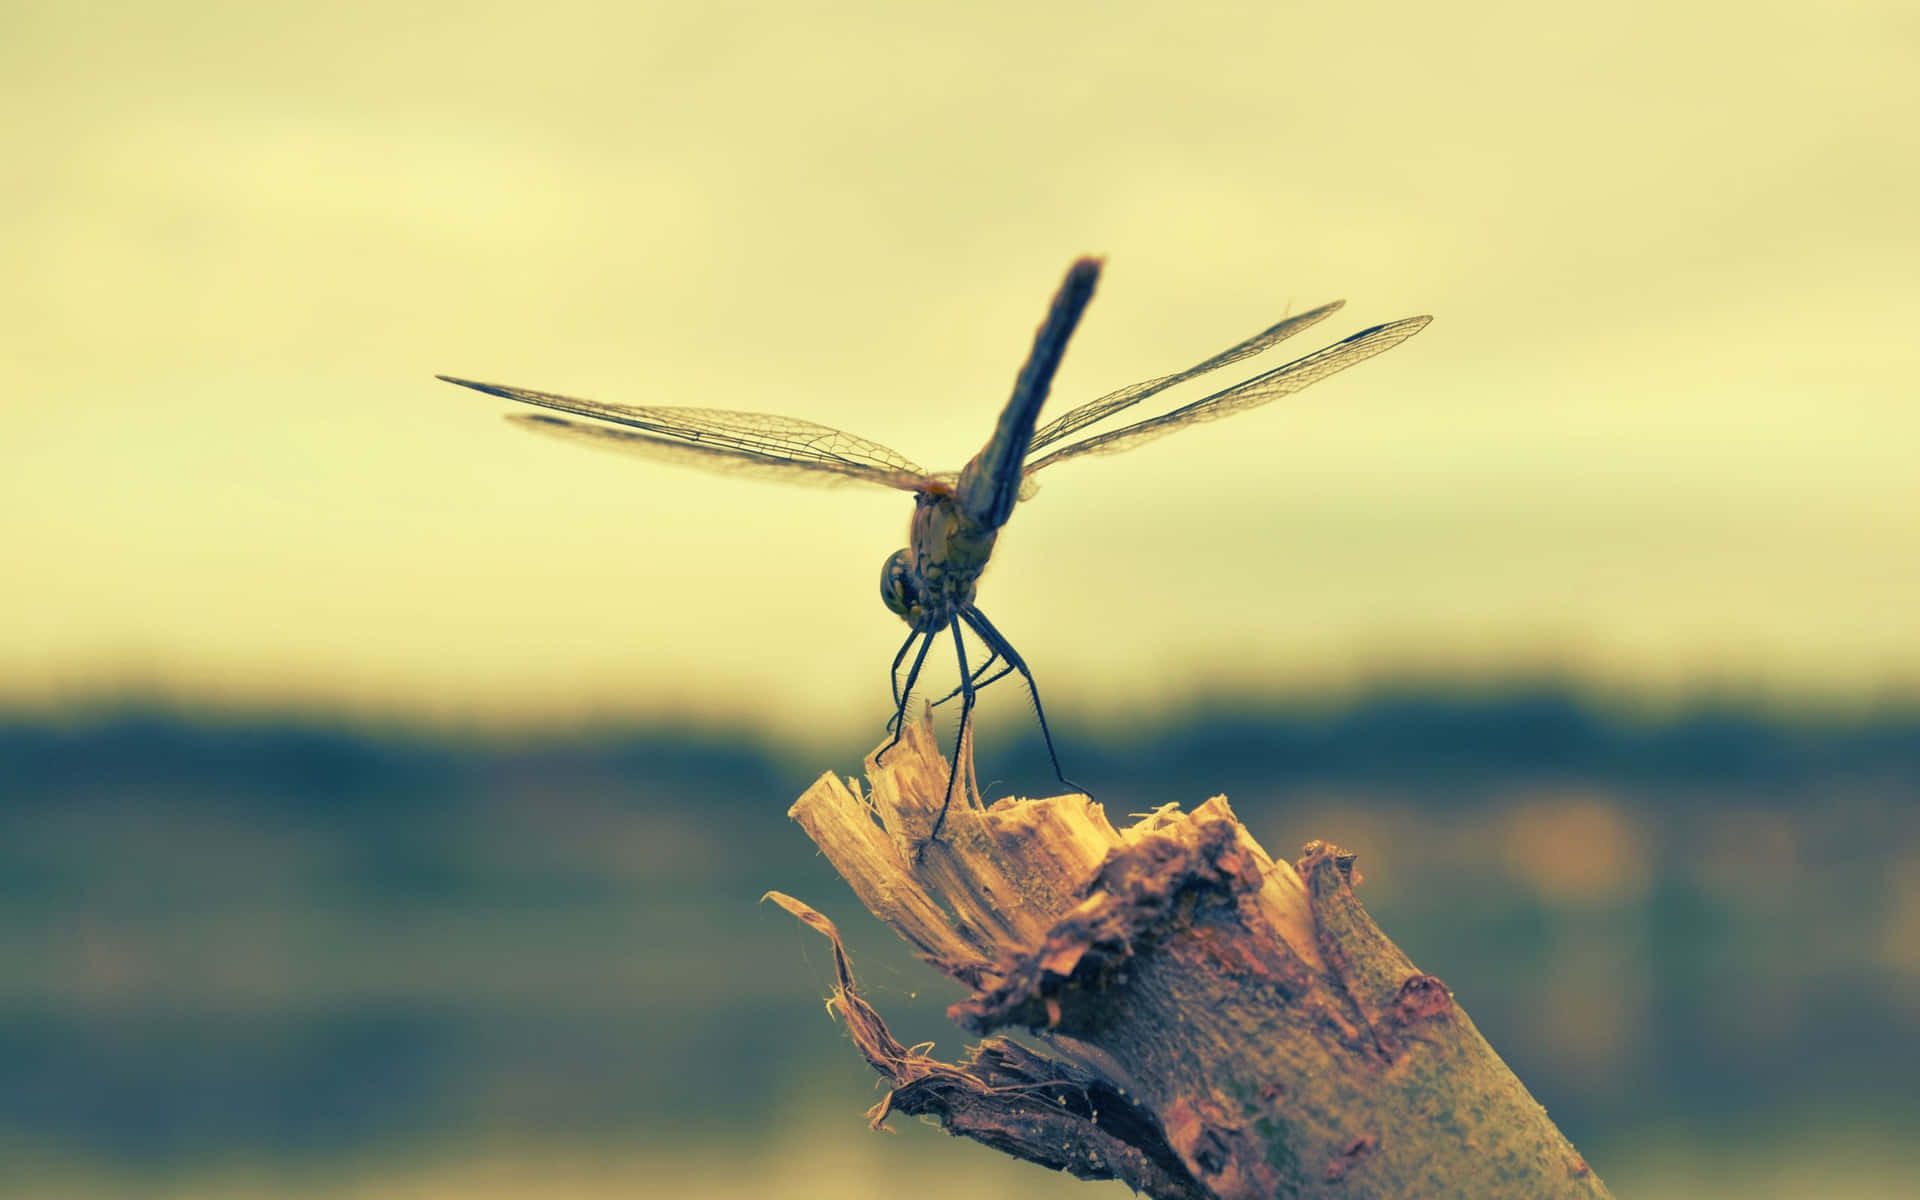 "Intricate beauty of a dragonfly is mesmerizing"